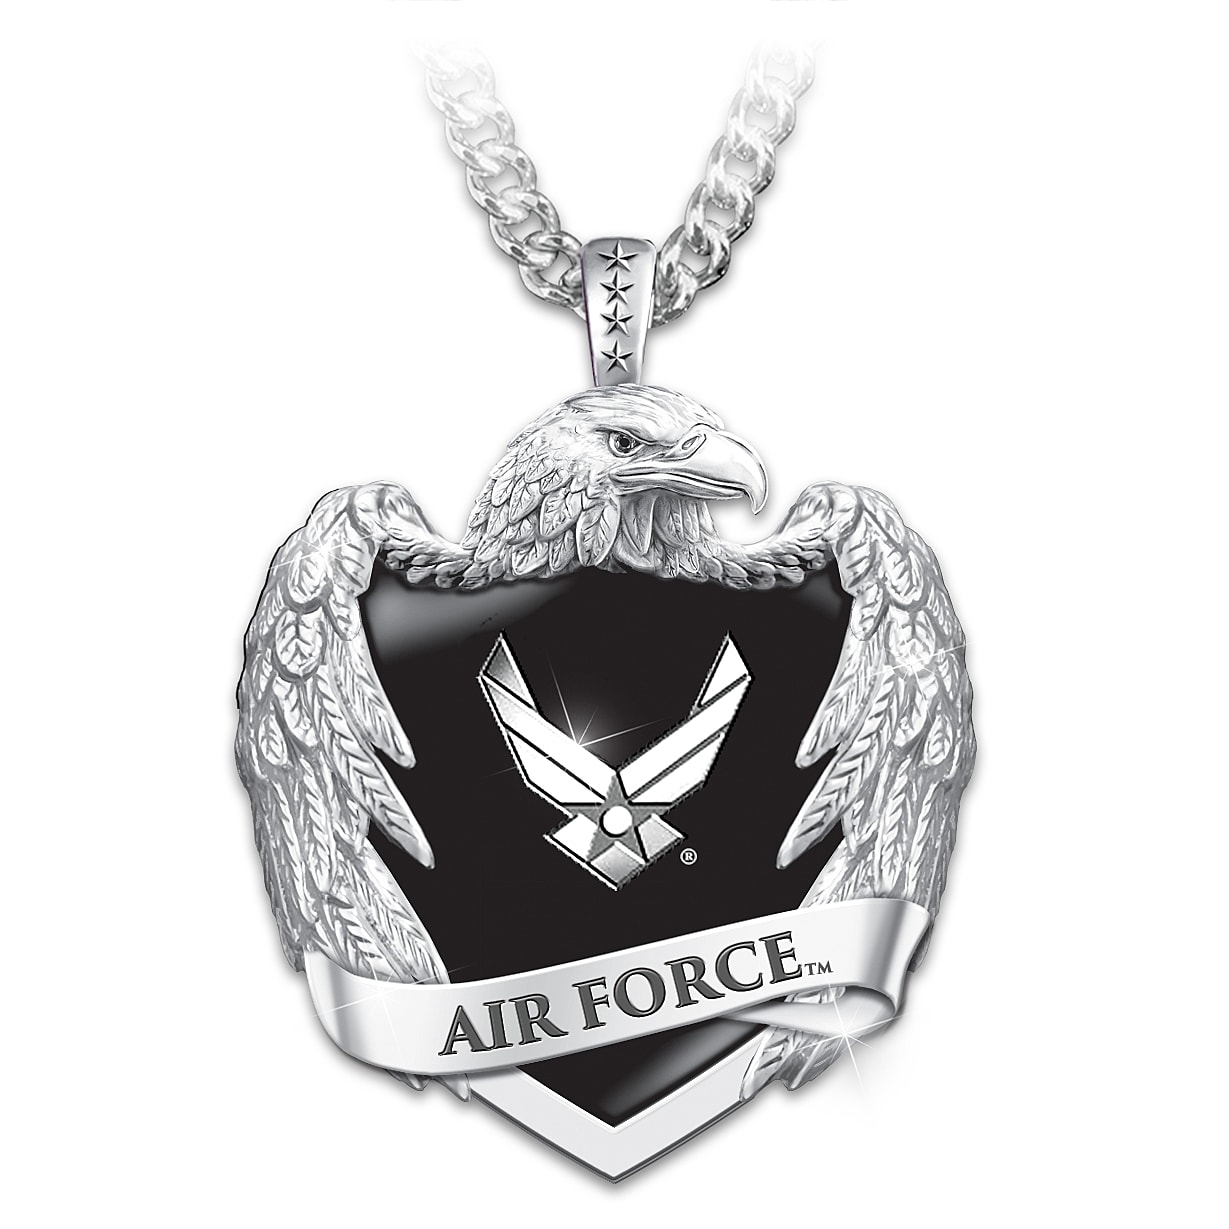 U.S. Air Force Mens Stainless Steel Eagle Shield Pendant Necklace